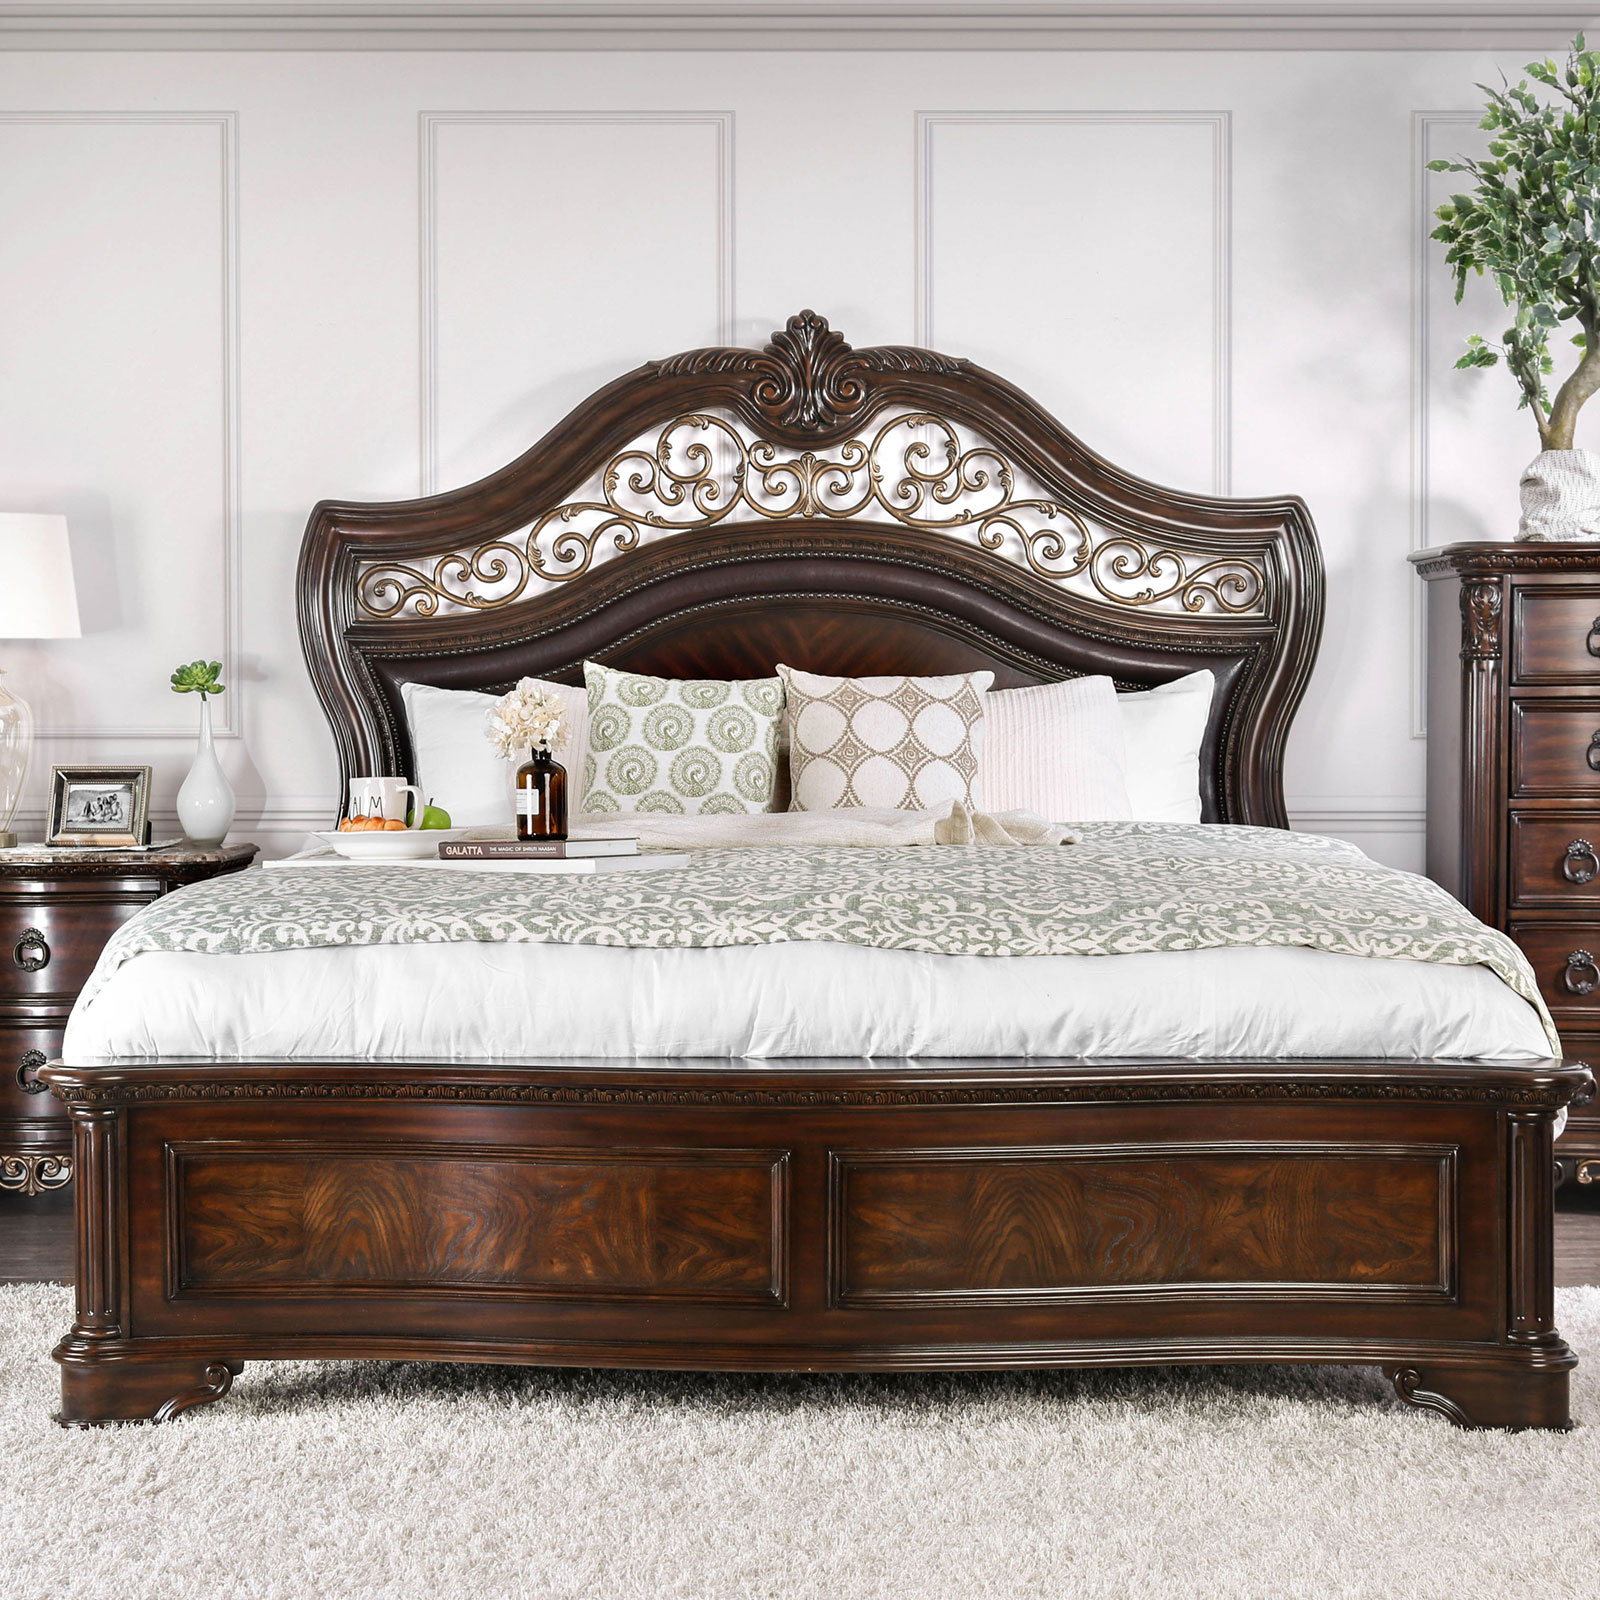 Esofastore Bedroom Solid Wood Camelback Headboard Traditional Formal  California King Size Bed Brown Cherry Sleigh Bed